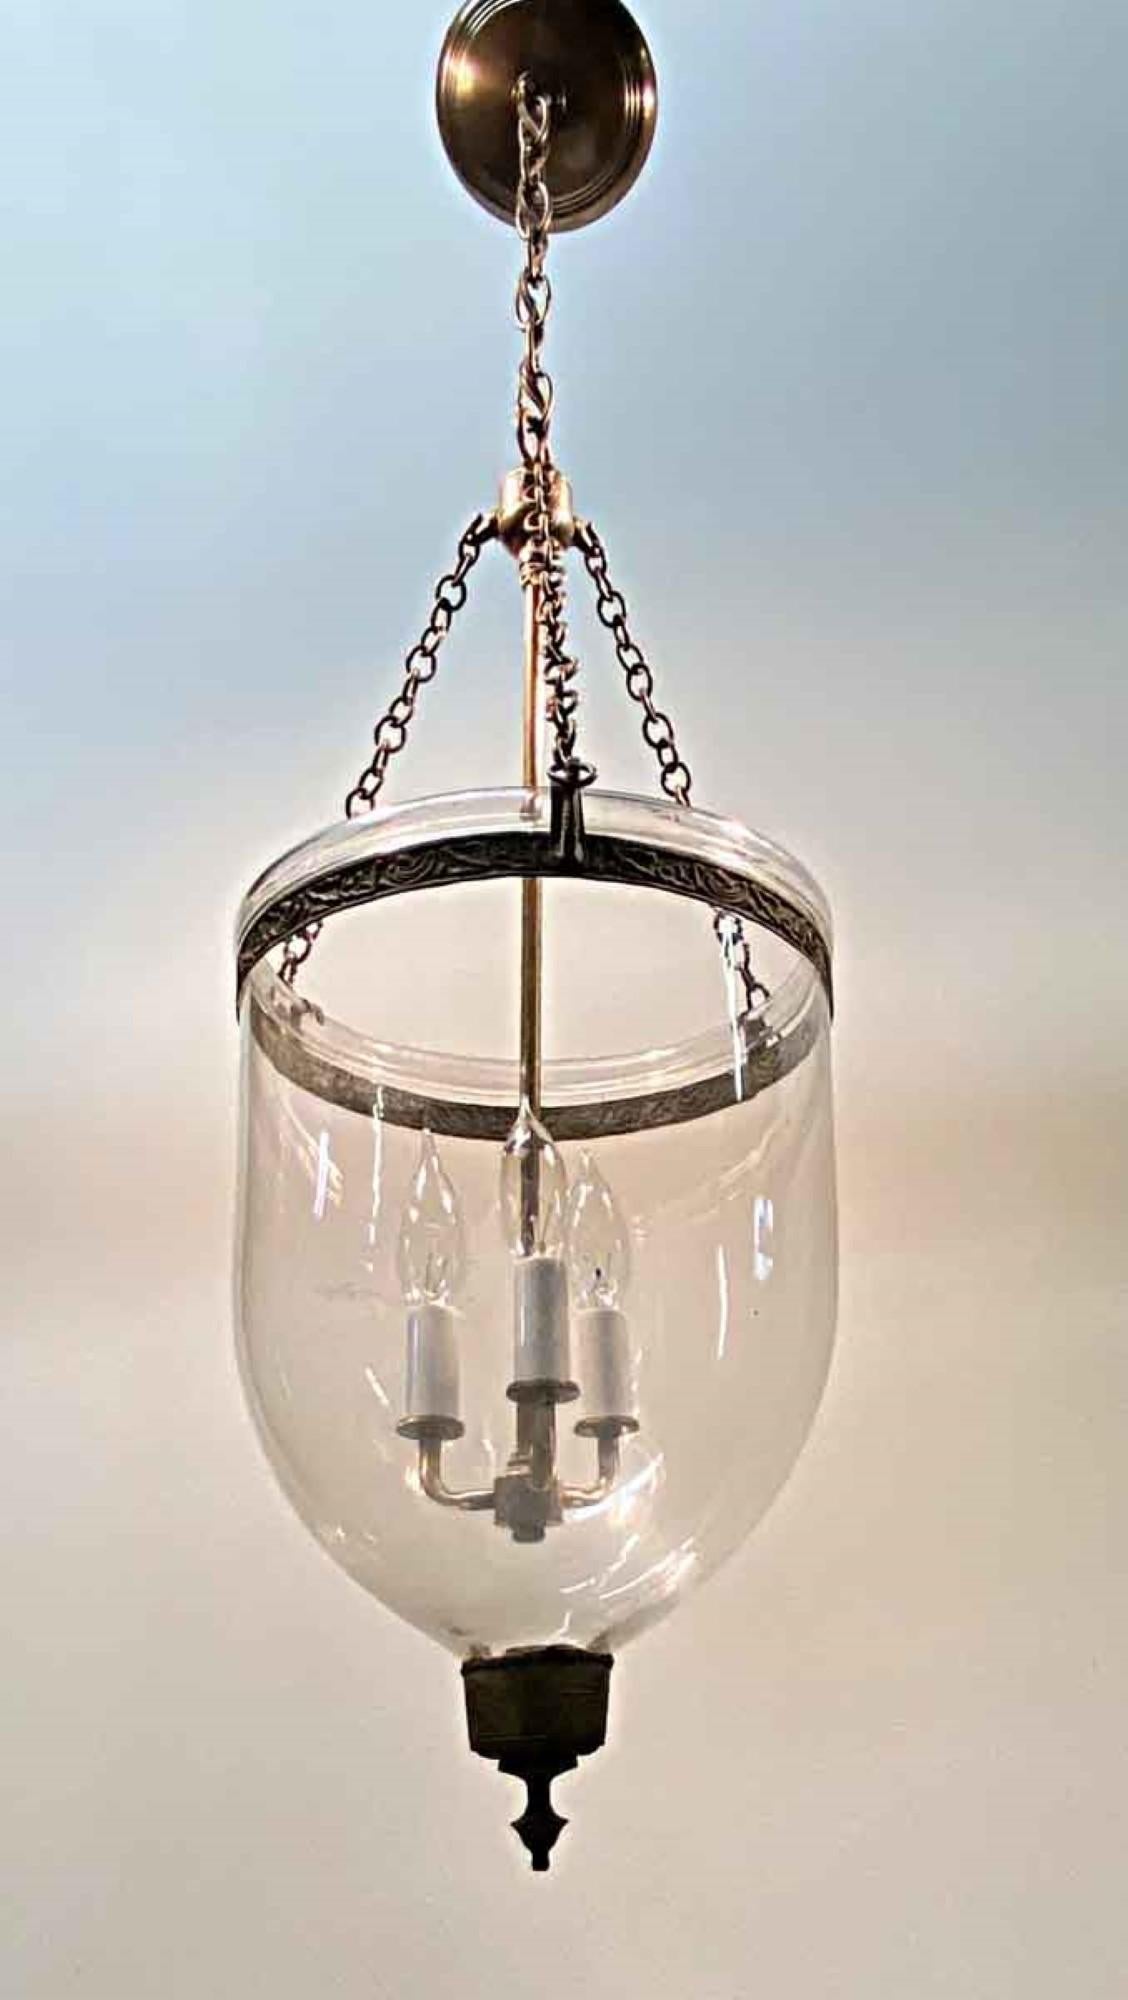 19th century English hand blown bell jar pendant lantern. This glass bell jar has a simple beauty, consisting of clear glass with no etching, and features the original aged patina brass finial and decorative ring around the neck. In the 1800s this